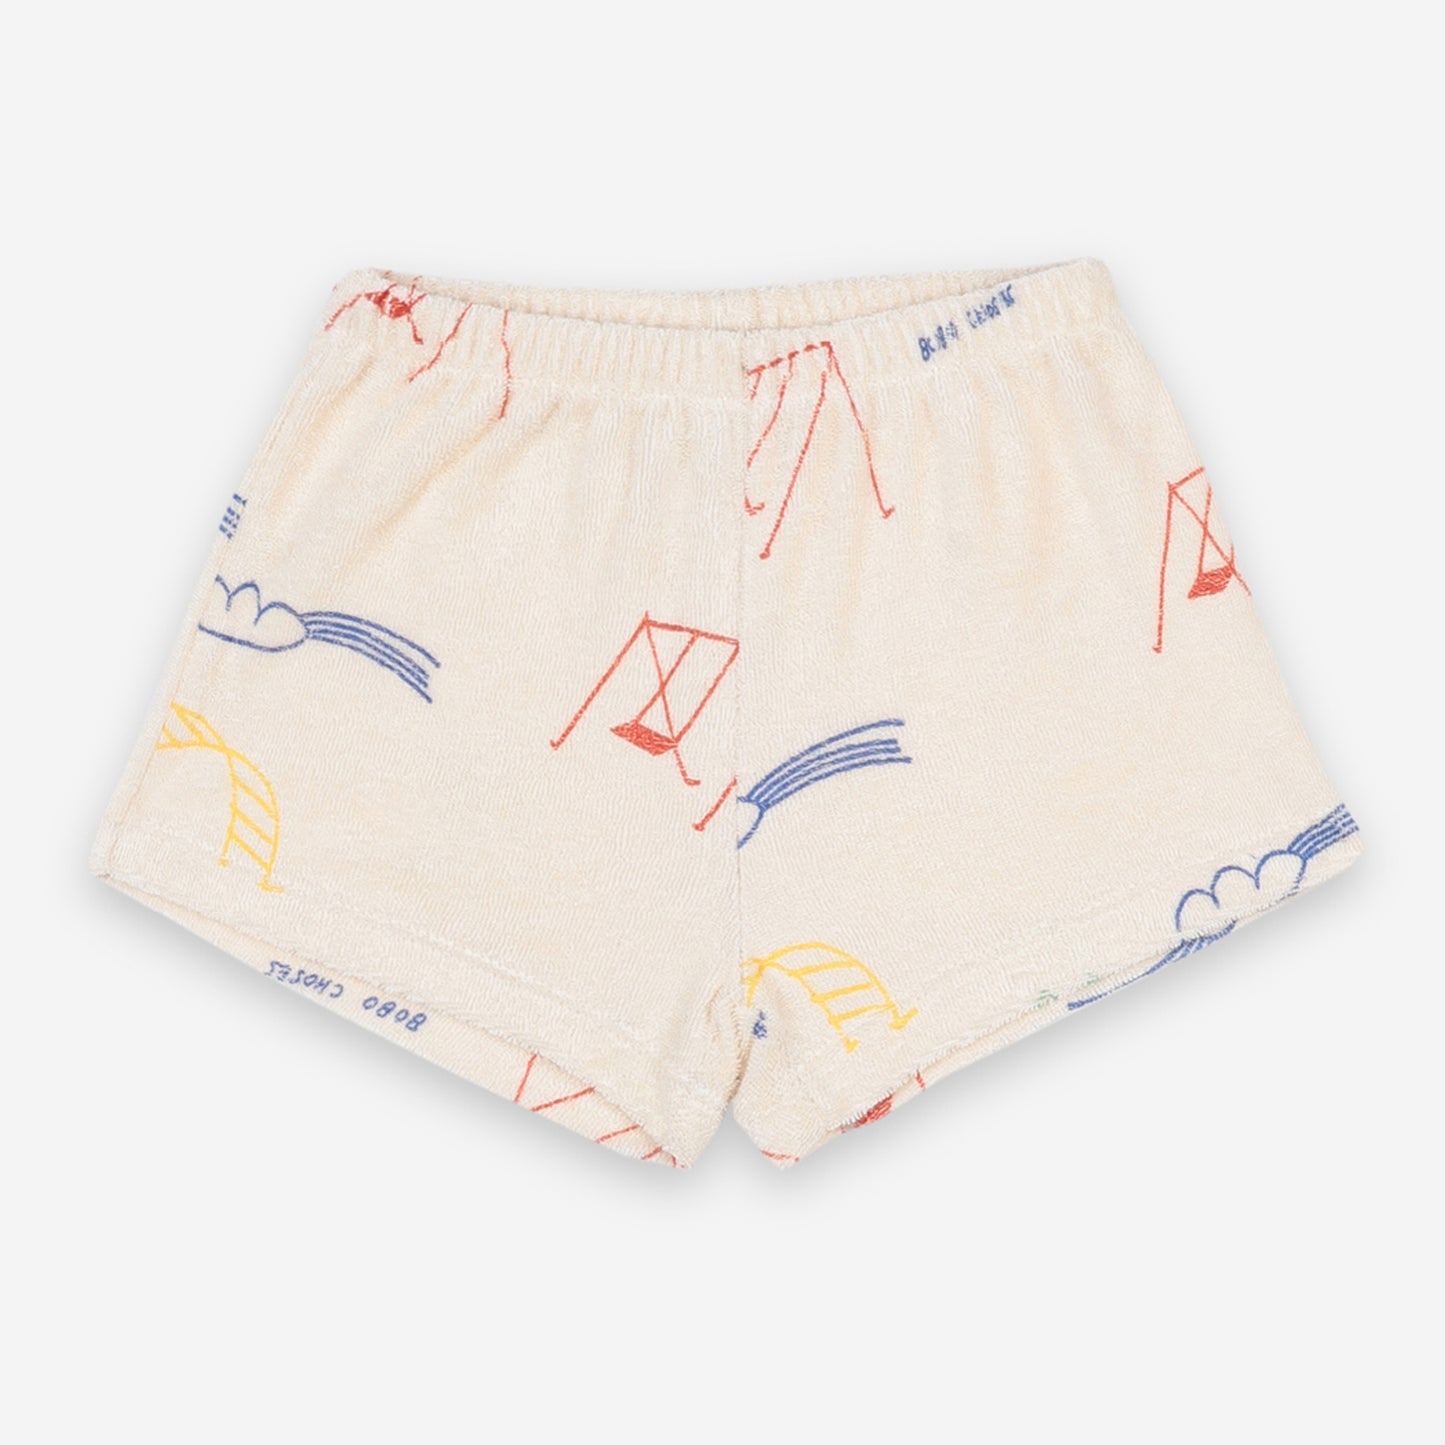 Playground All Over Terry Fleece Shorts